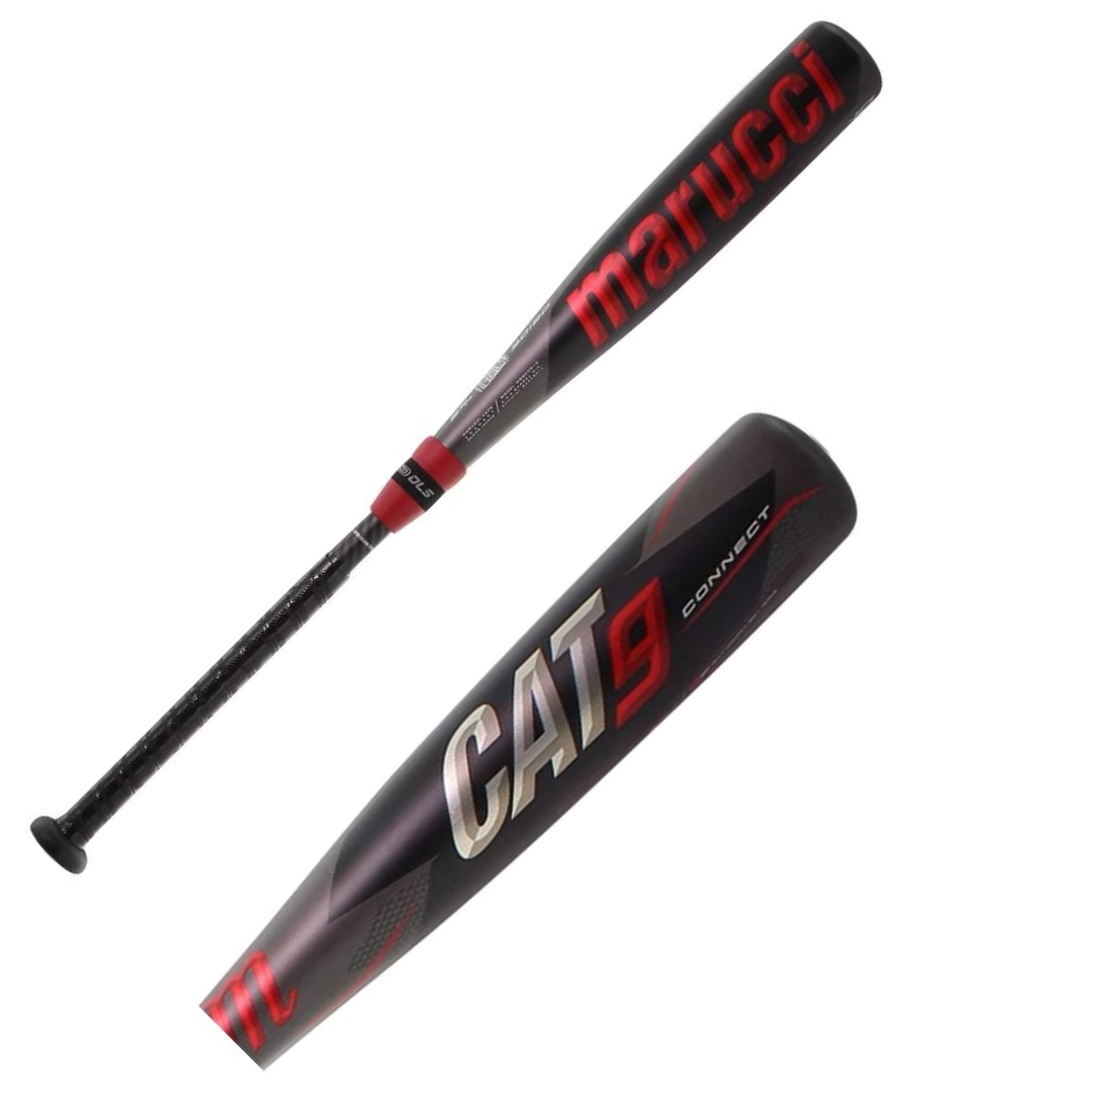 marucci-cat-9-connect-10-usssa-baseball-bat-30-inch-20-oz MSBCC910-3020 Marucci  Utilizing a three-stage thermal treatment process our new AZR alloy offers